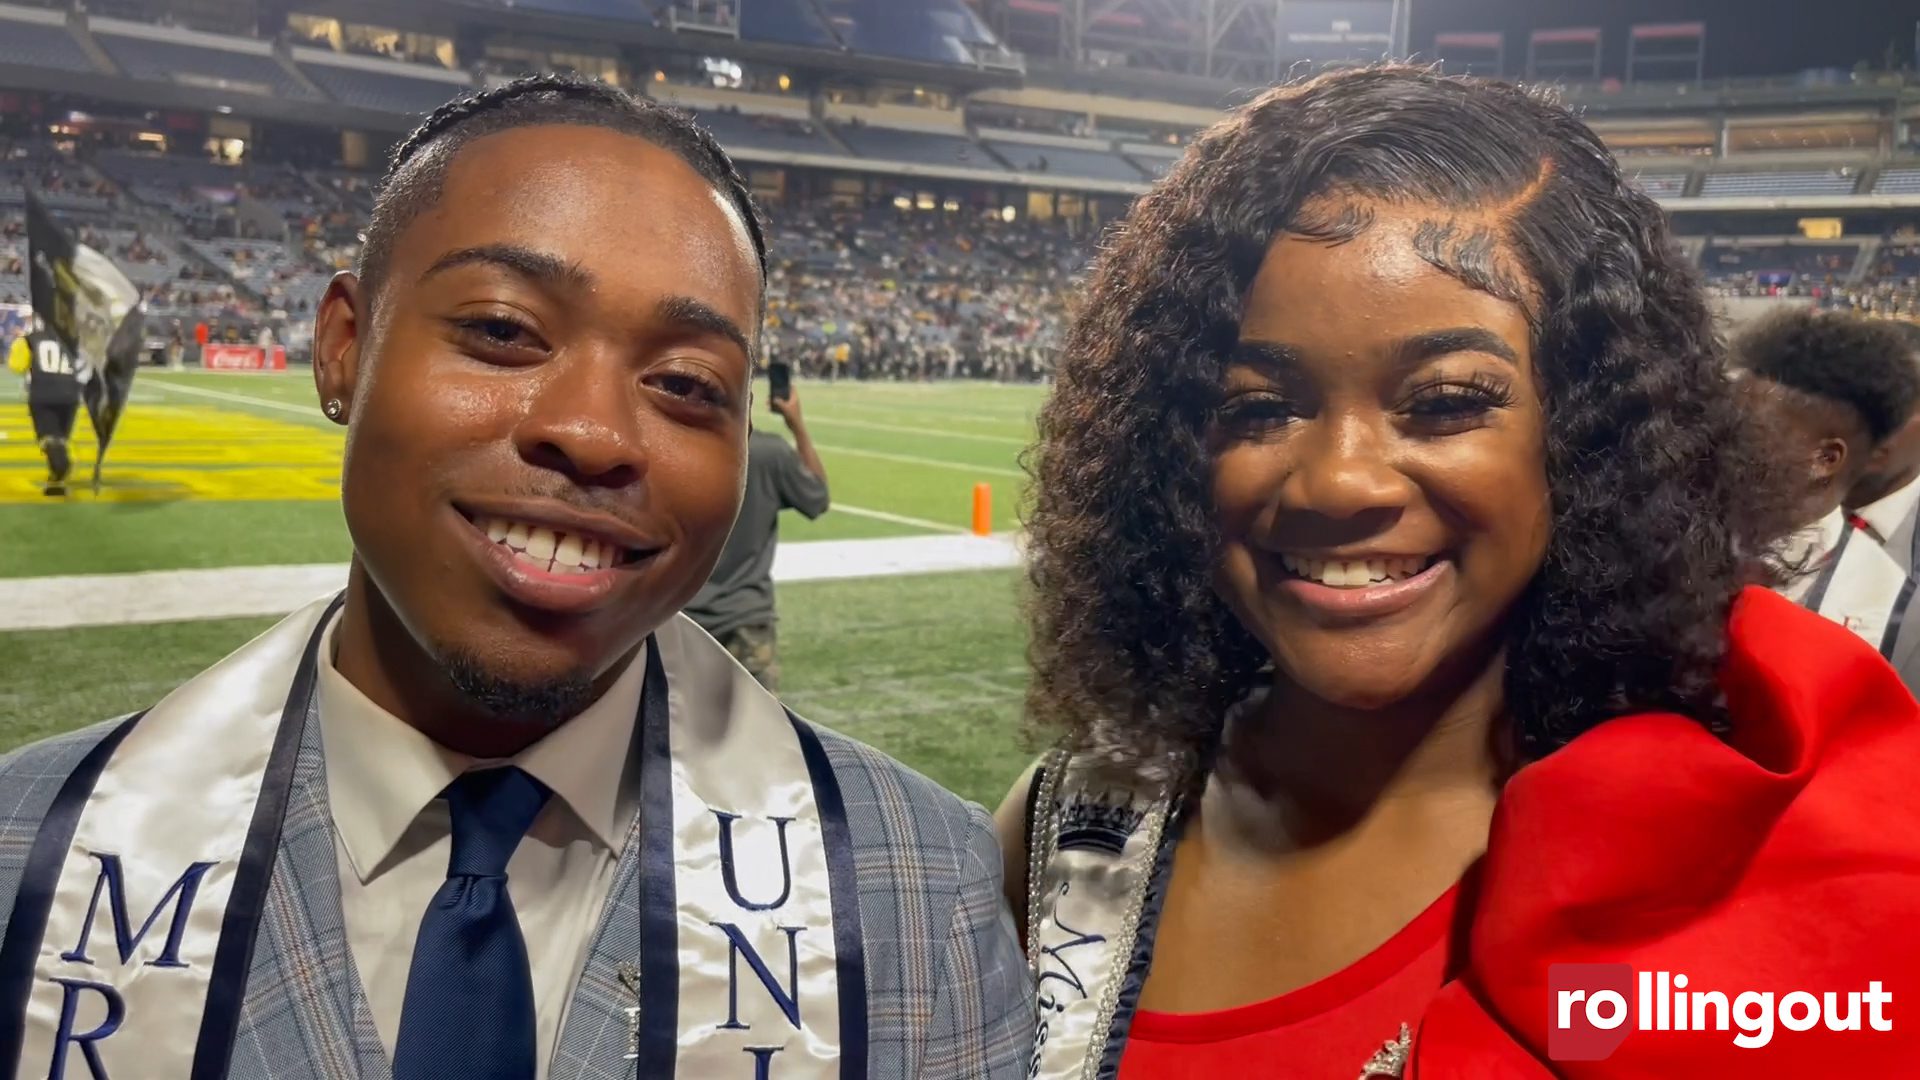 Mister and Miss Howard reflect on significance of representing their university